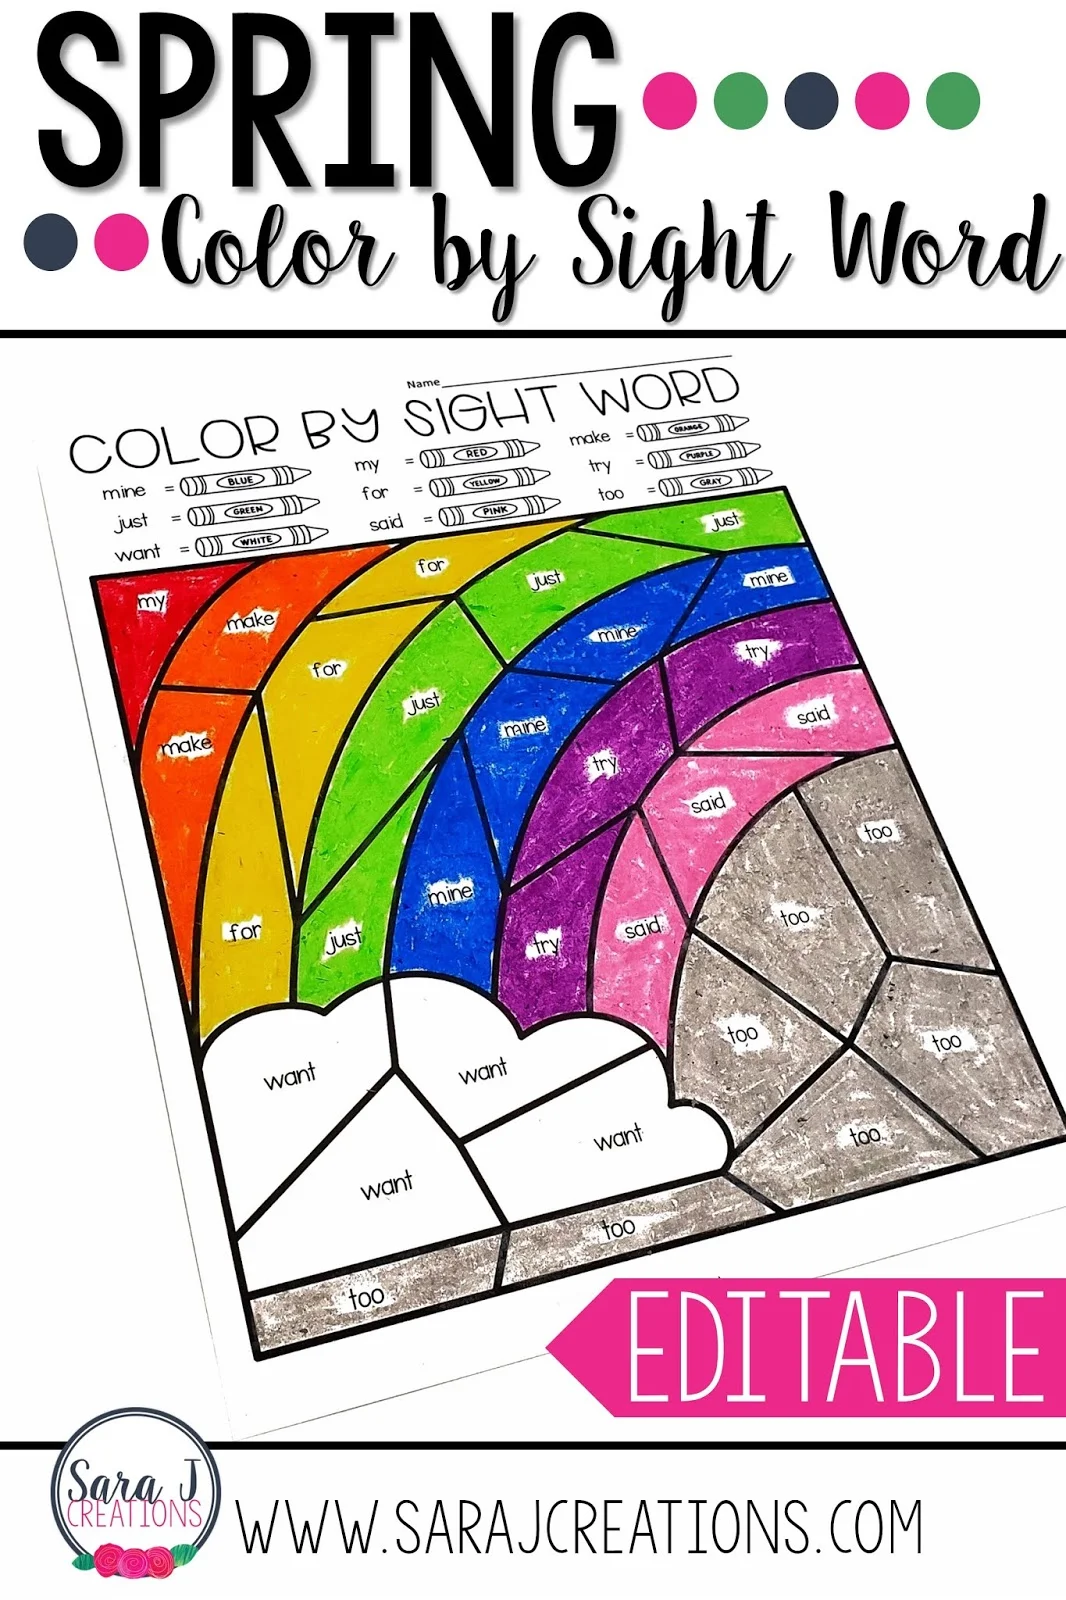 Editable Spring Color by Sight Word pages!!!!  No matter what sight words your students are working on, you can create personalized coloring worksheets in a snap! Make spring, St. Patrick's Day and Easter more fun with these printable color by sight word worksheets.